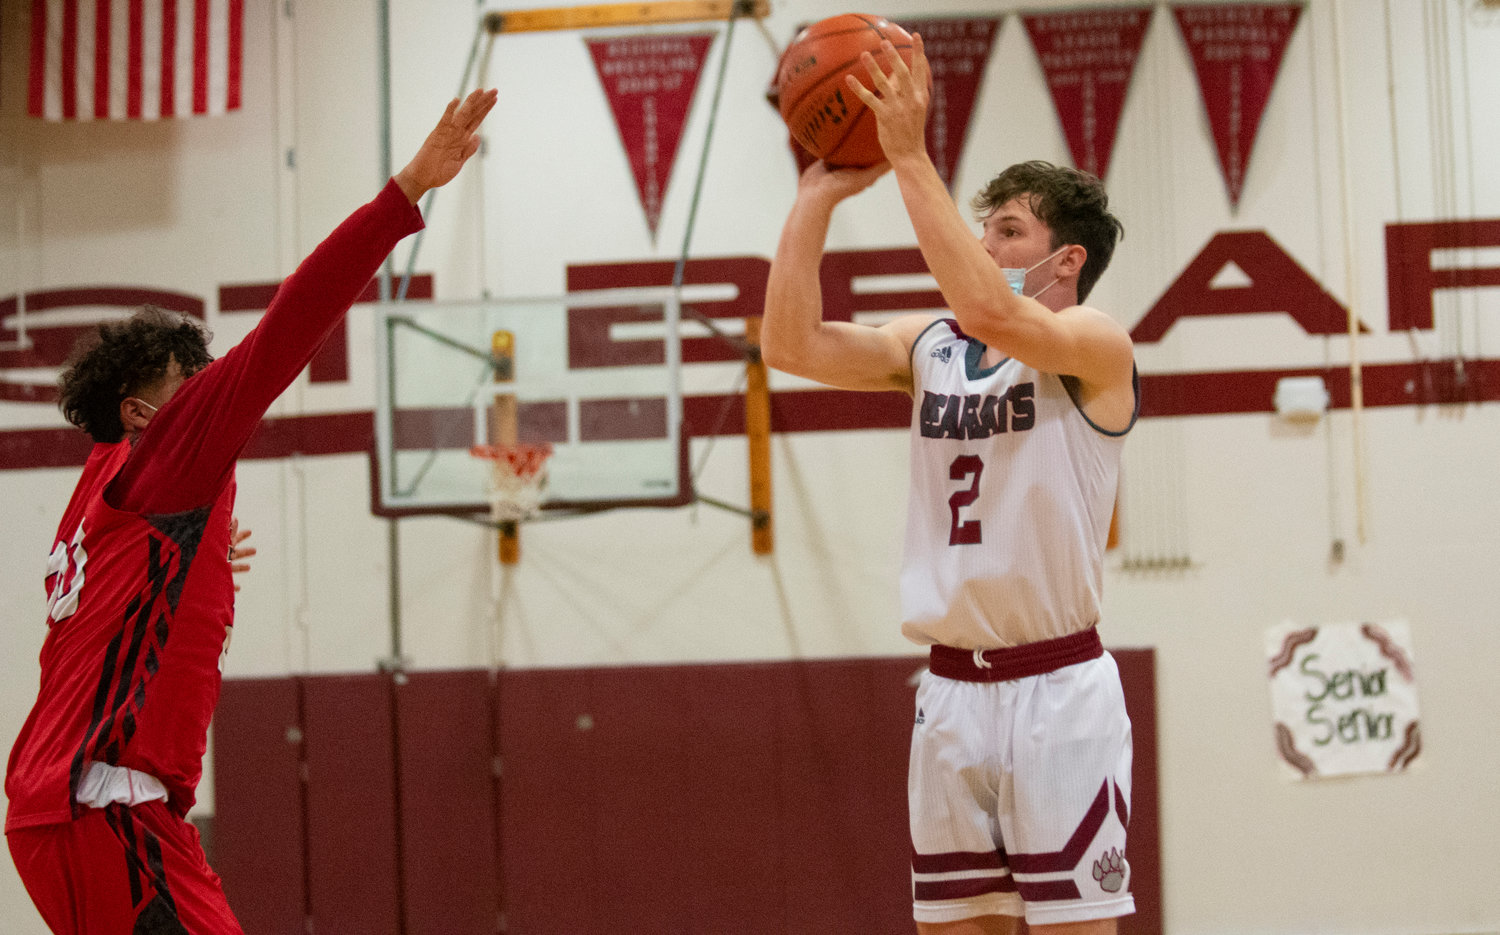 W.F. West senior Max Taylor shoots a 3-pointer over a Shelton player on Tuesday.